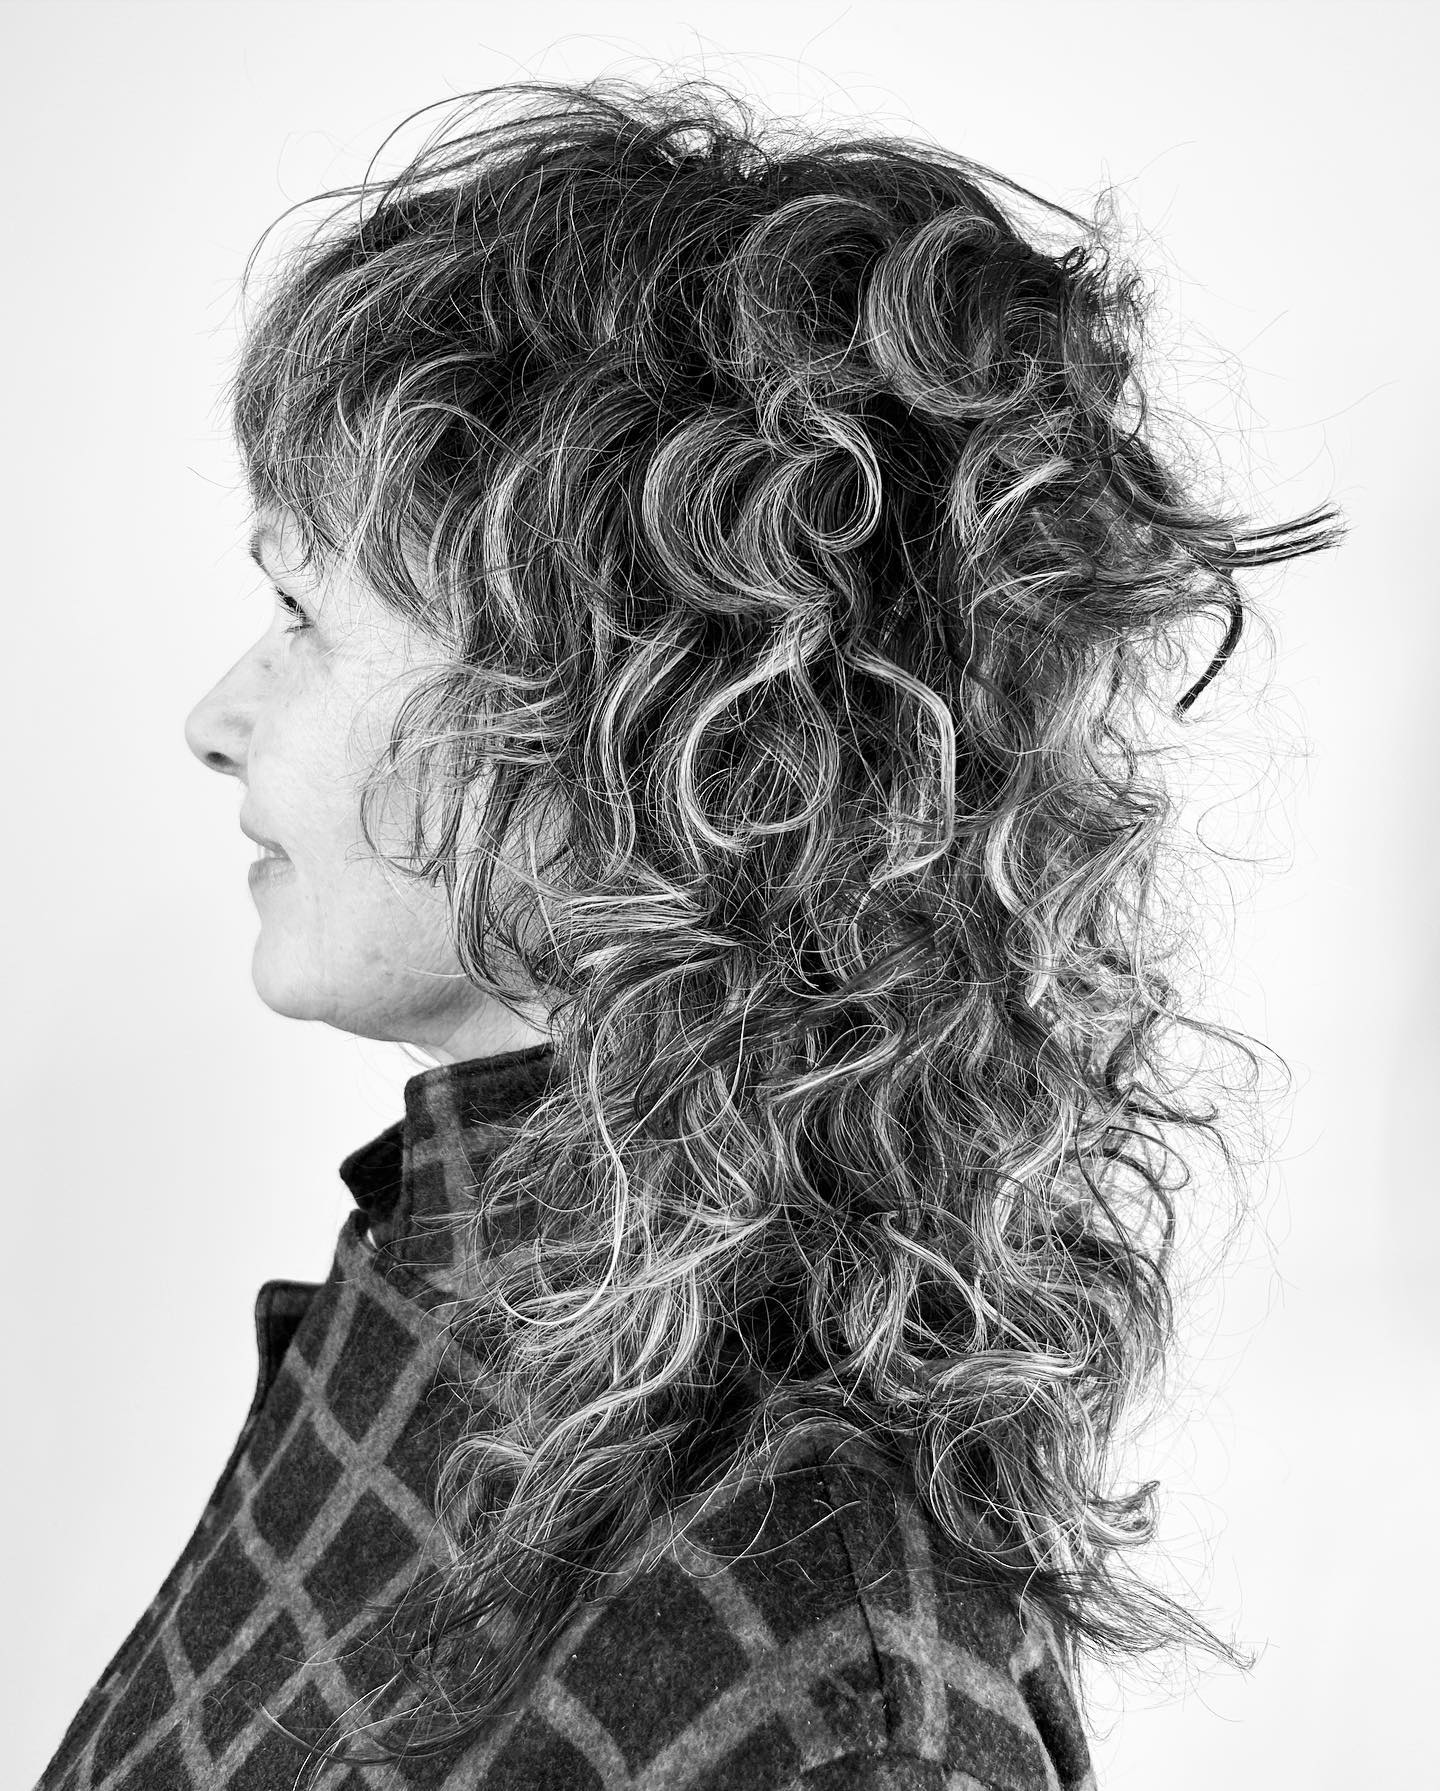 Curly Shag Hairstyle 80 Curly hair shaggy bob | Curly shag mullet | Medium length curly shags Curly Shag Hairstyles for Women